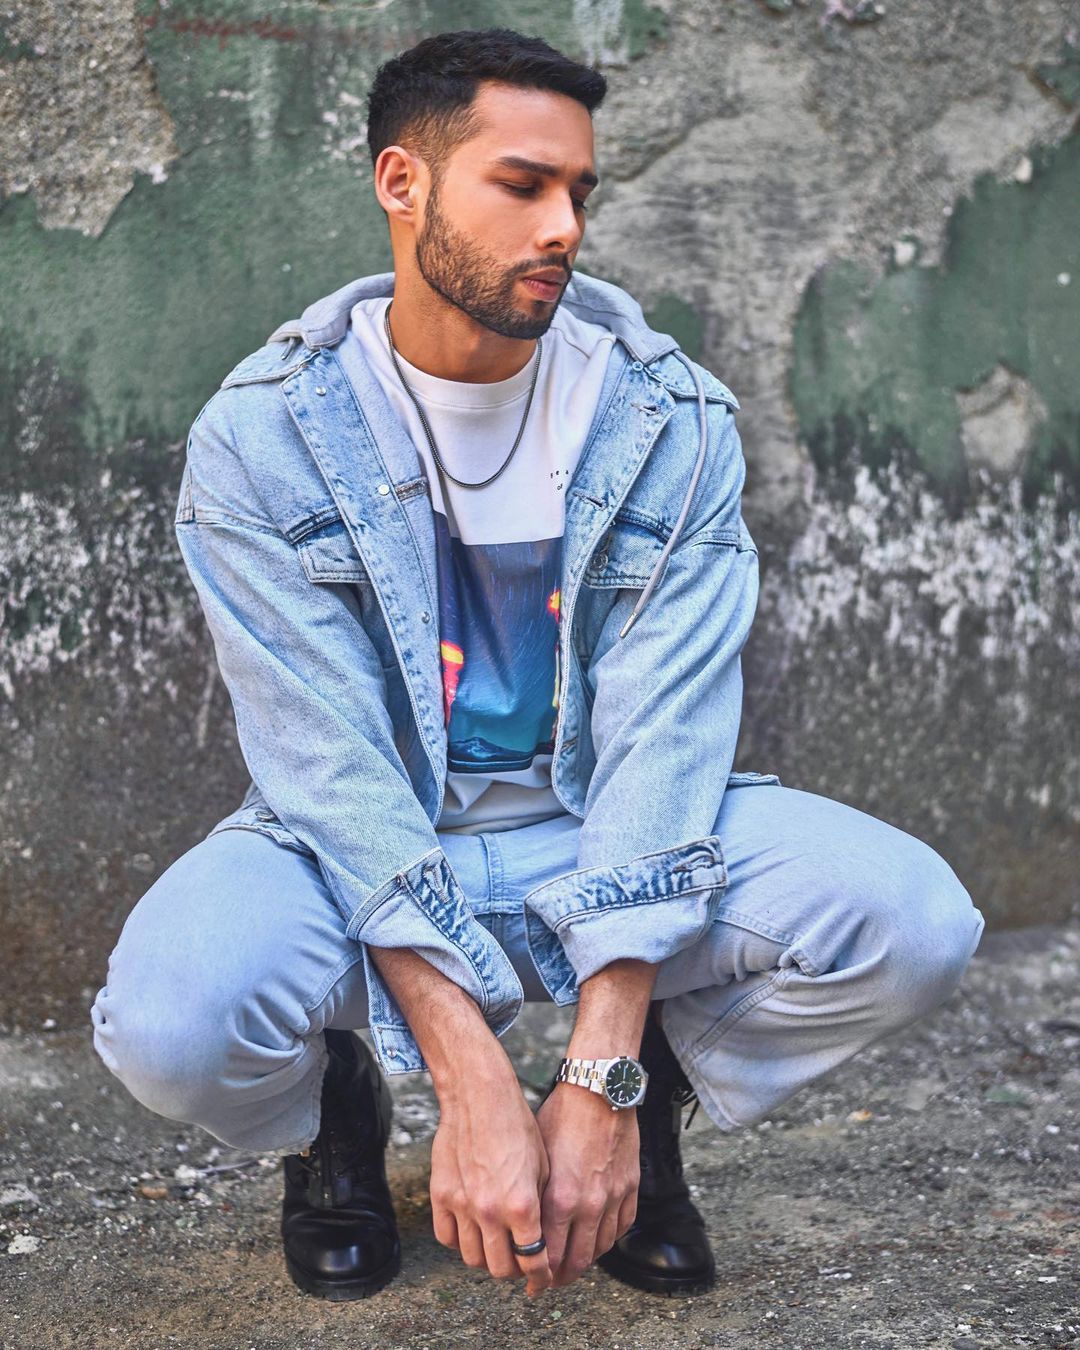 Siddhant Chaturvedi's latest transformation post is the perfect treat for  his fans!